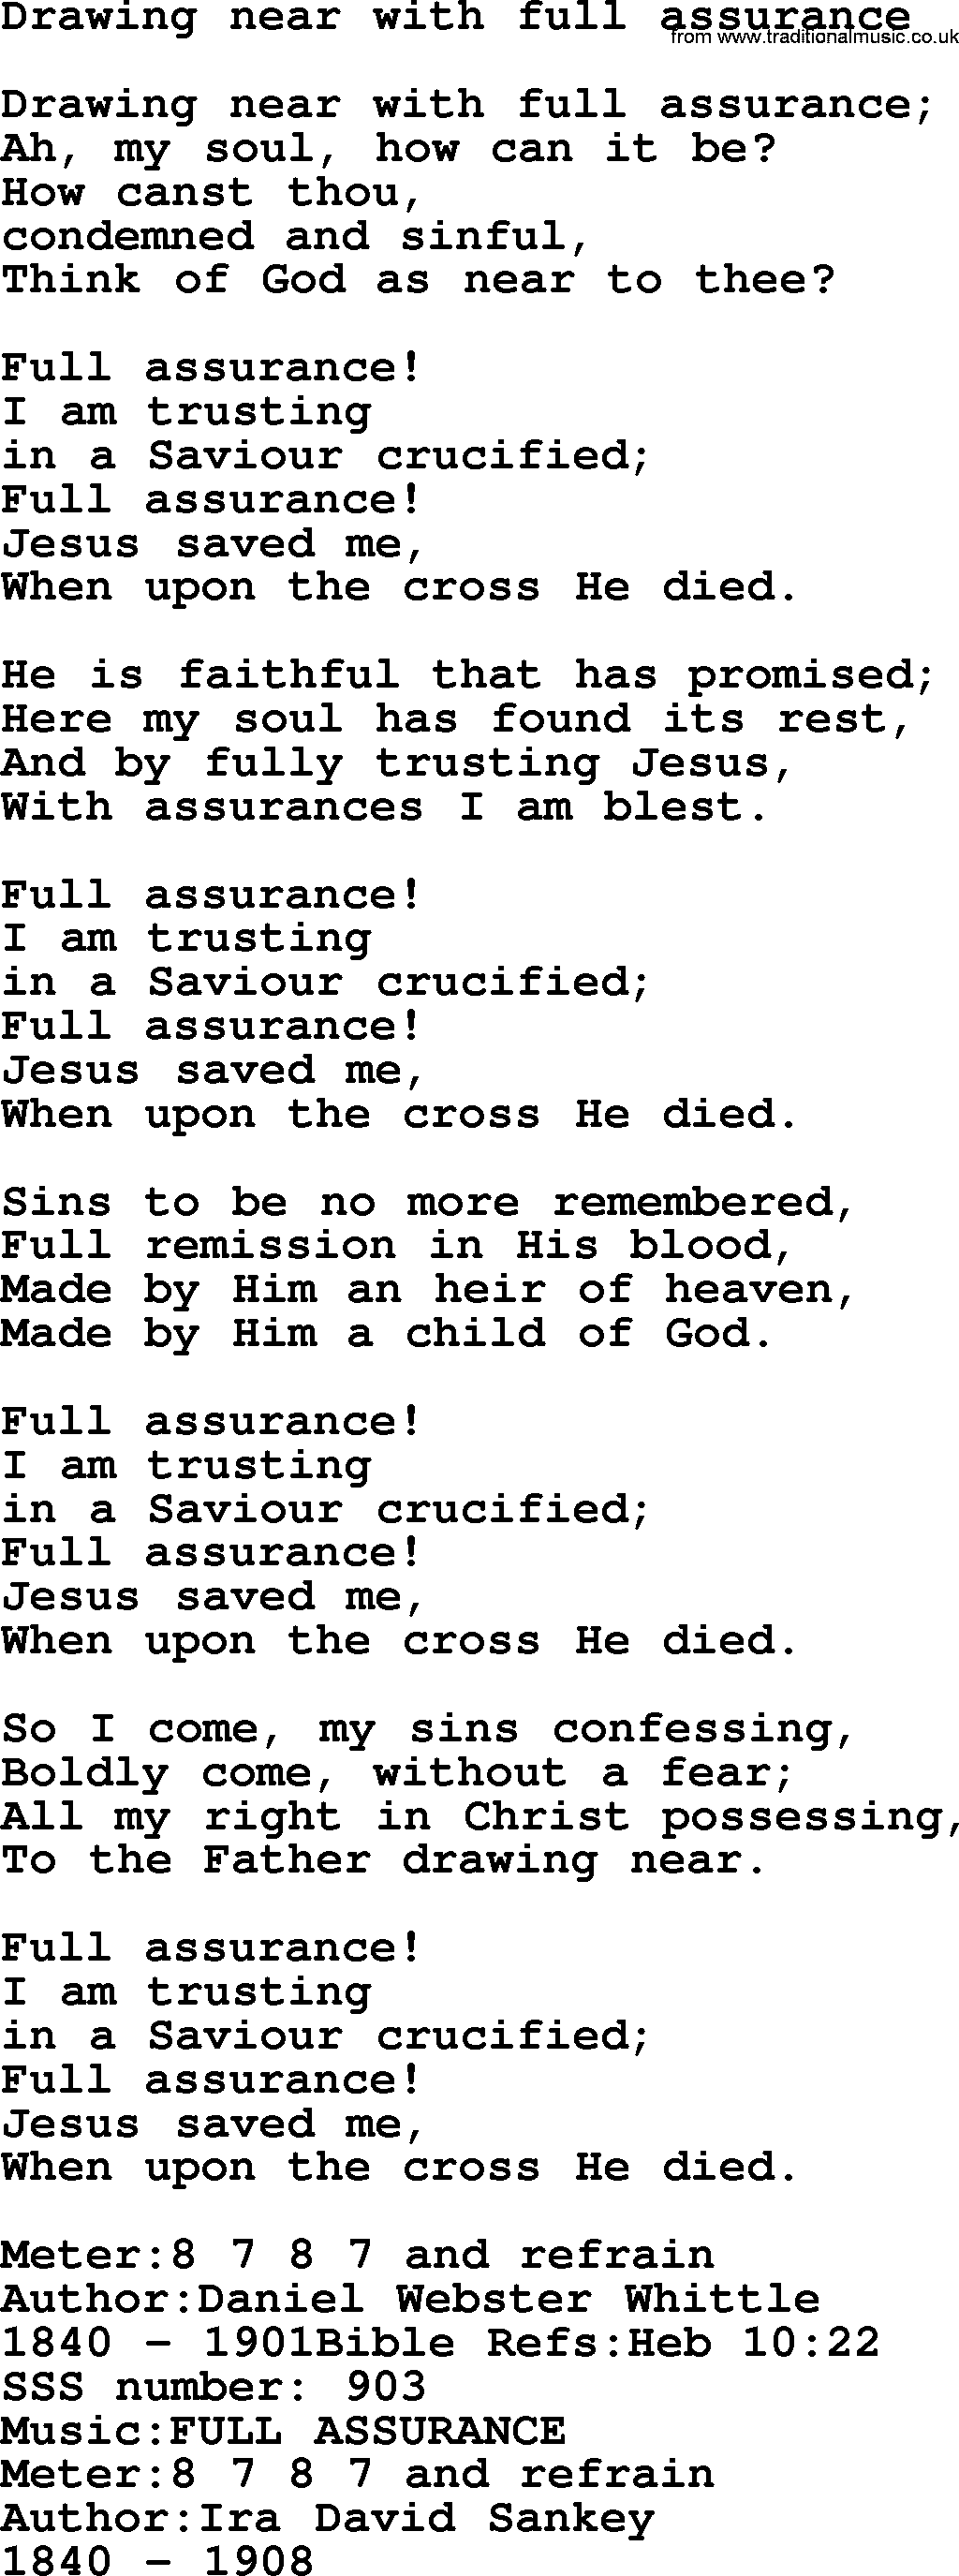 Sacred Songs and Solos complete, 1200 Hymns, title: Drawing Near With Full Assurance, lyrics and PDF